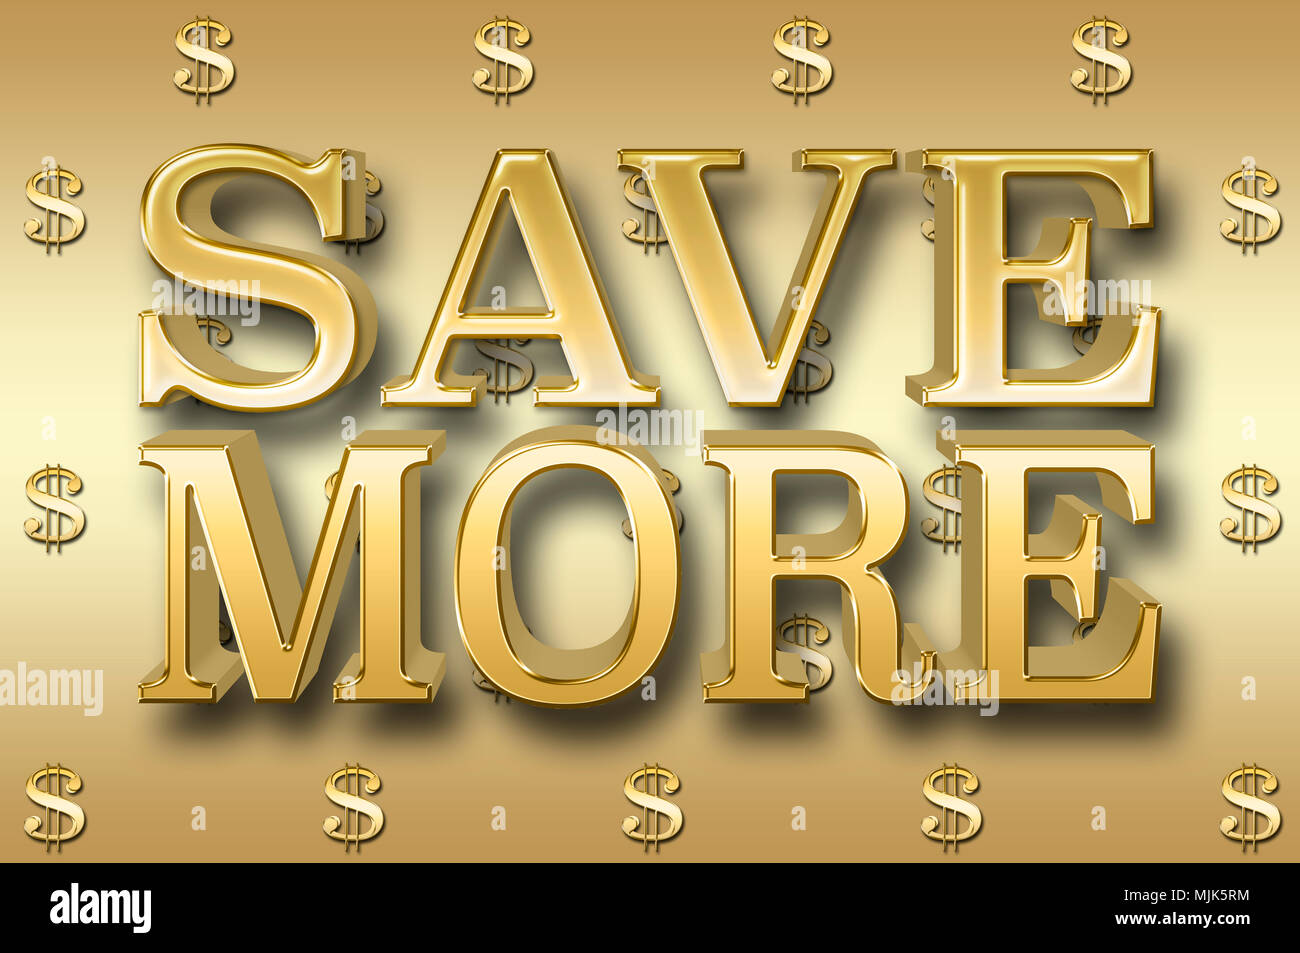 Stock Illustration - Large Metallic Text: Save More, 3D Illustration, Small Golden Dollar Currency Signs In the Golden Background. Stock Photo